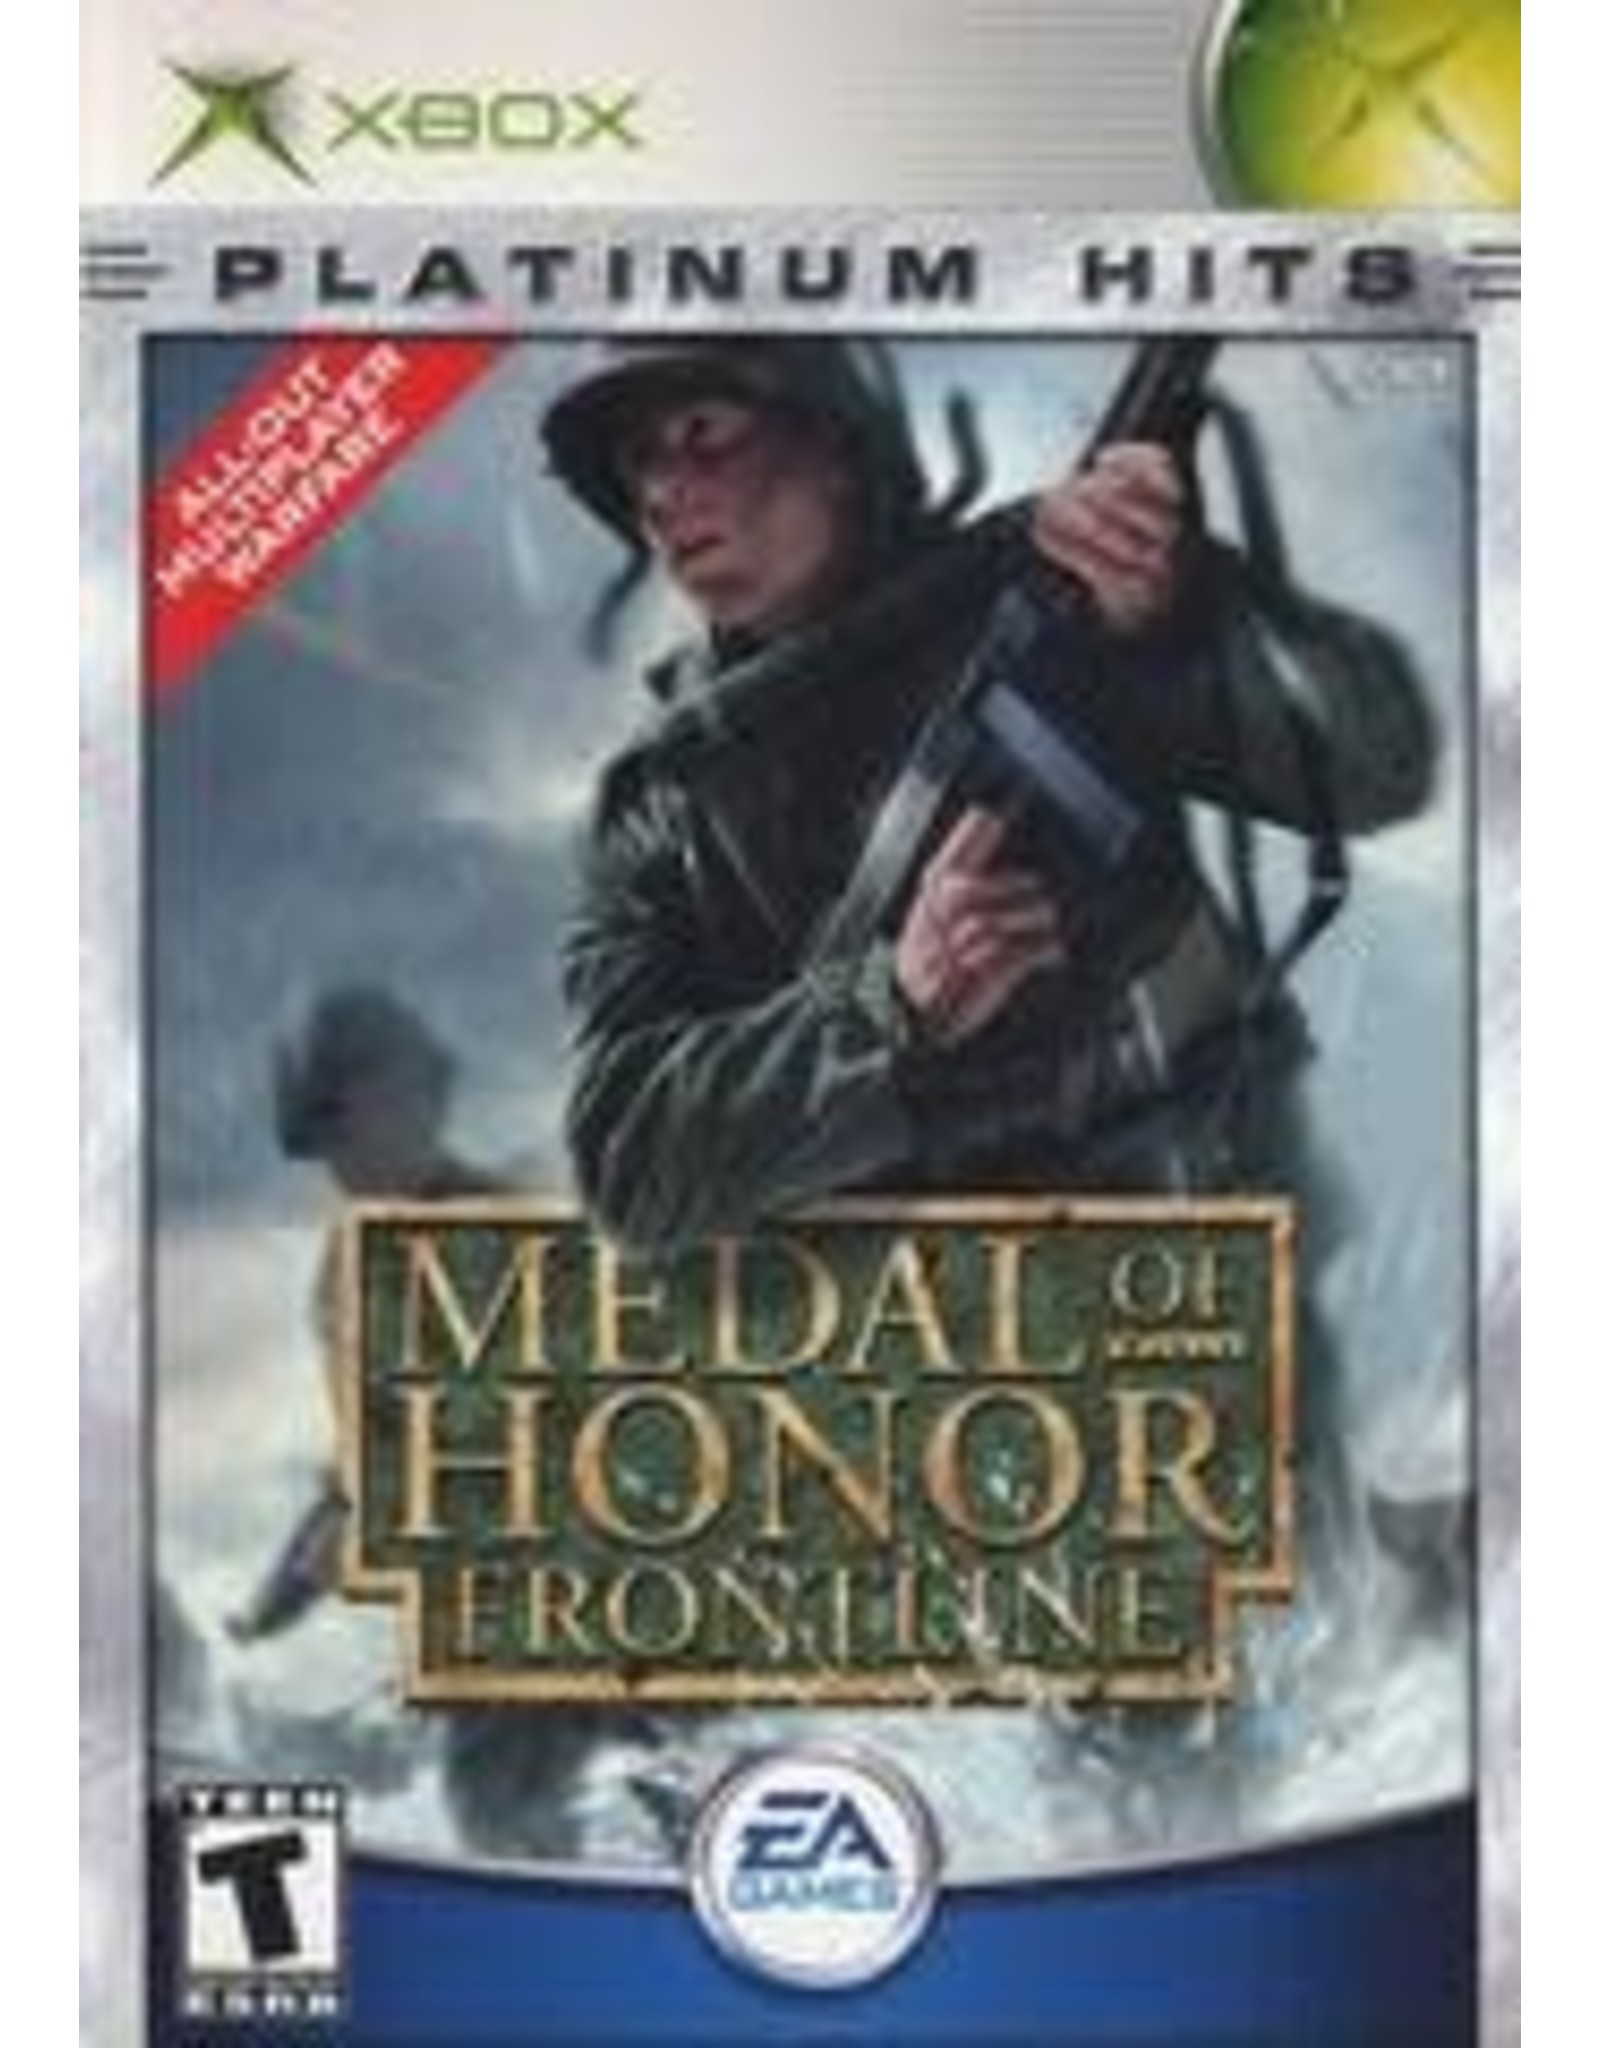 Xbox Medal of Honor Frontline - Platinum Hits (Used)